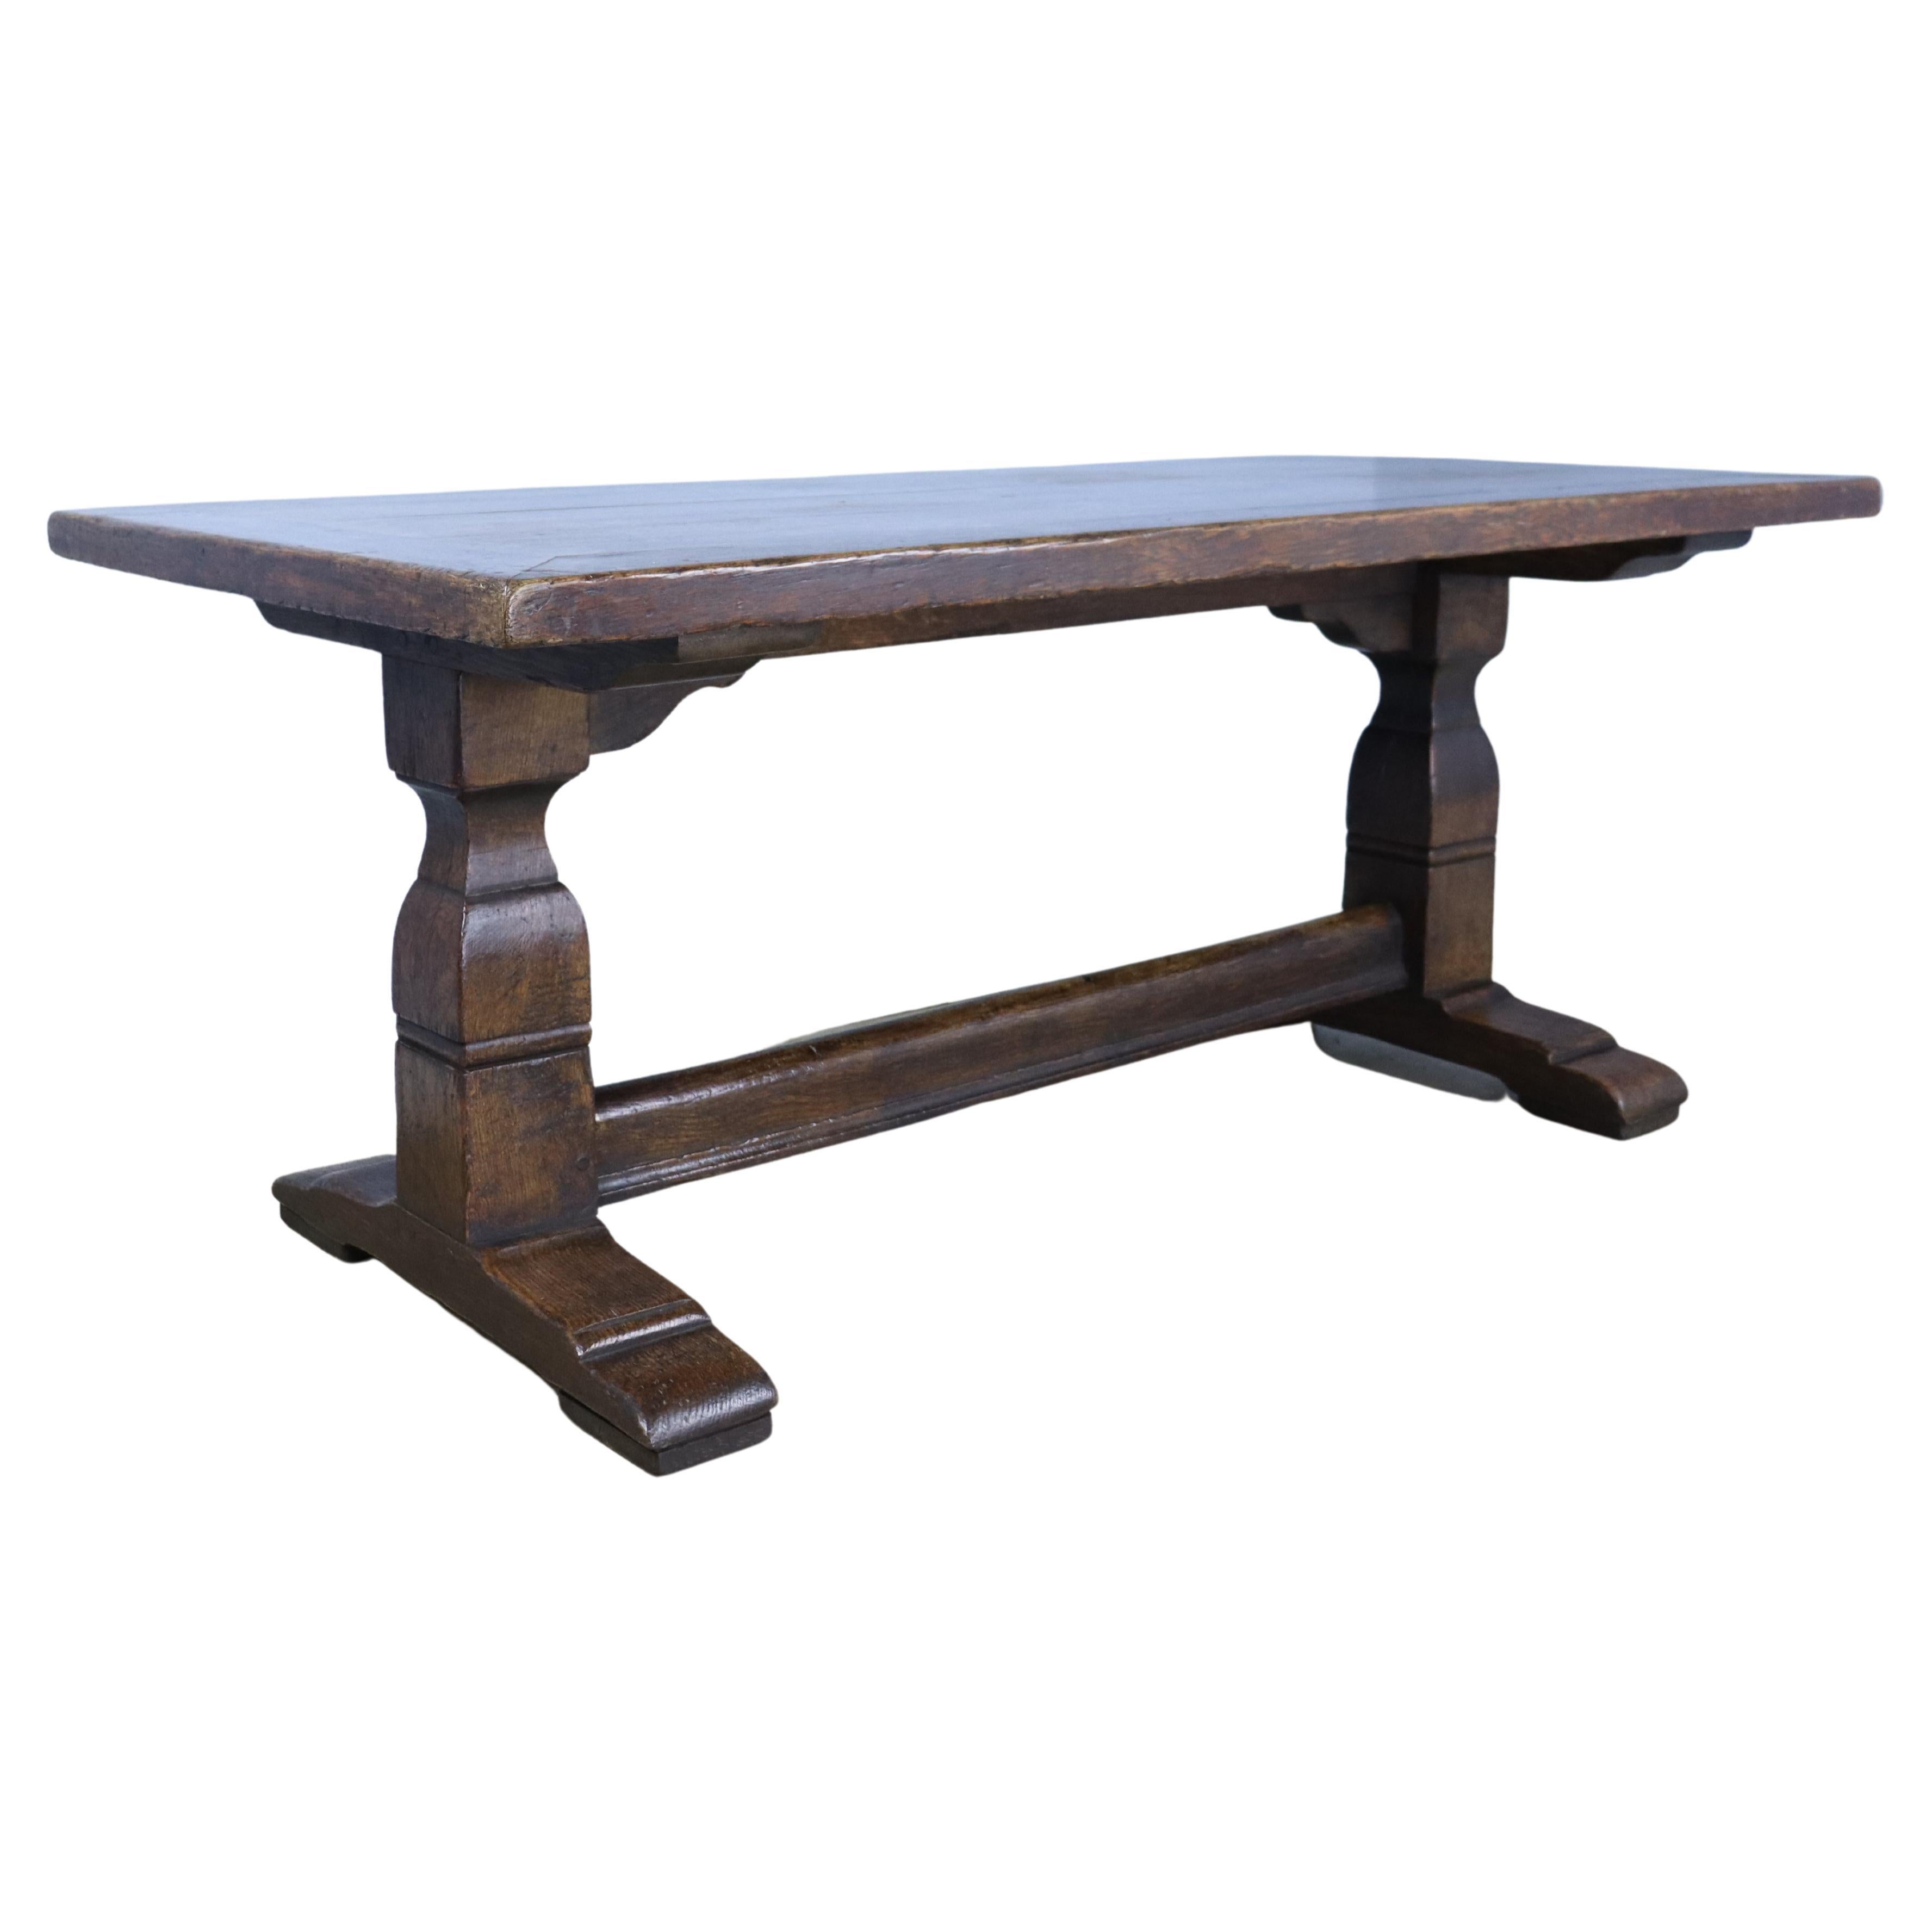 Victorian Oak Testle Based Farm Table Made from Earlier Timber For Sale